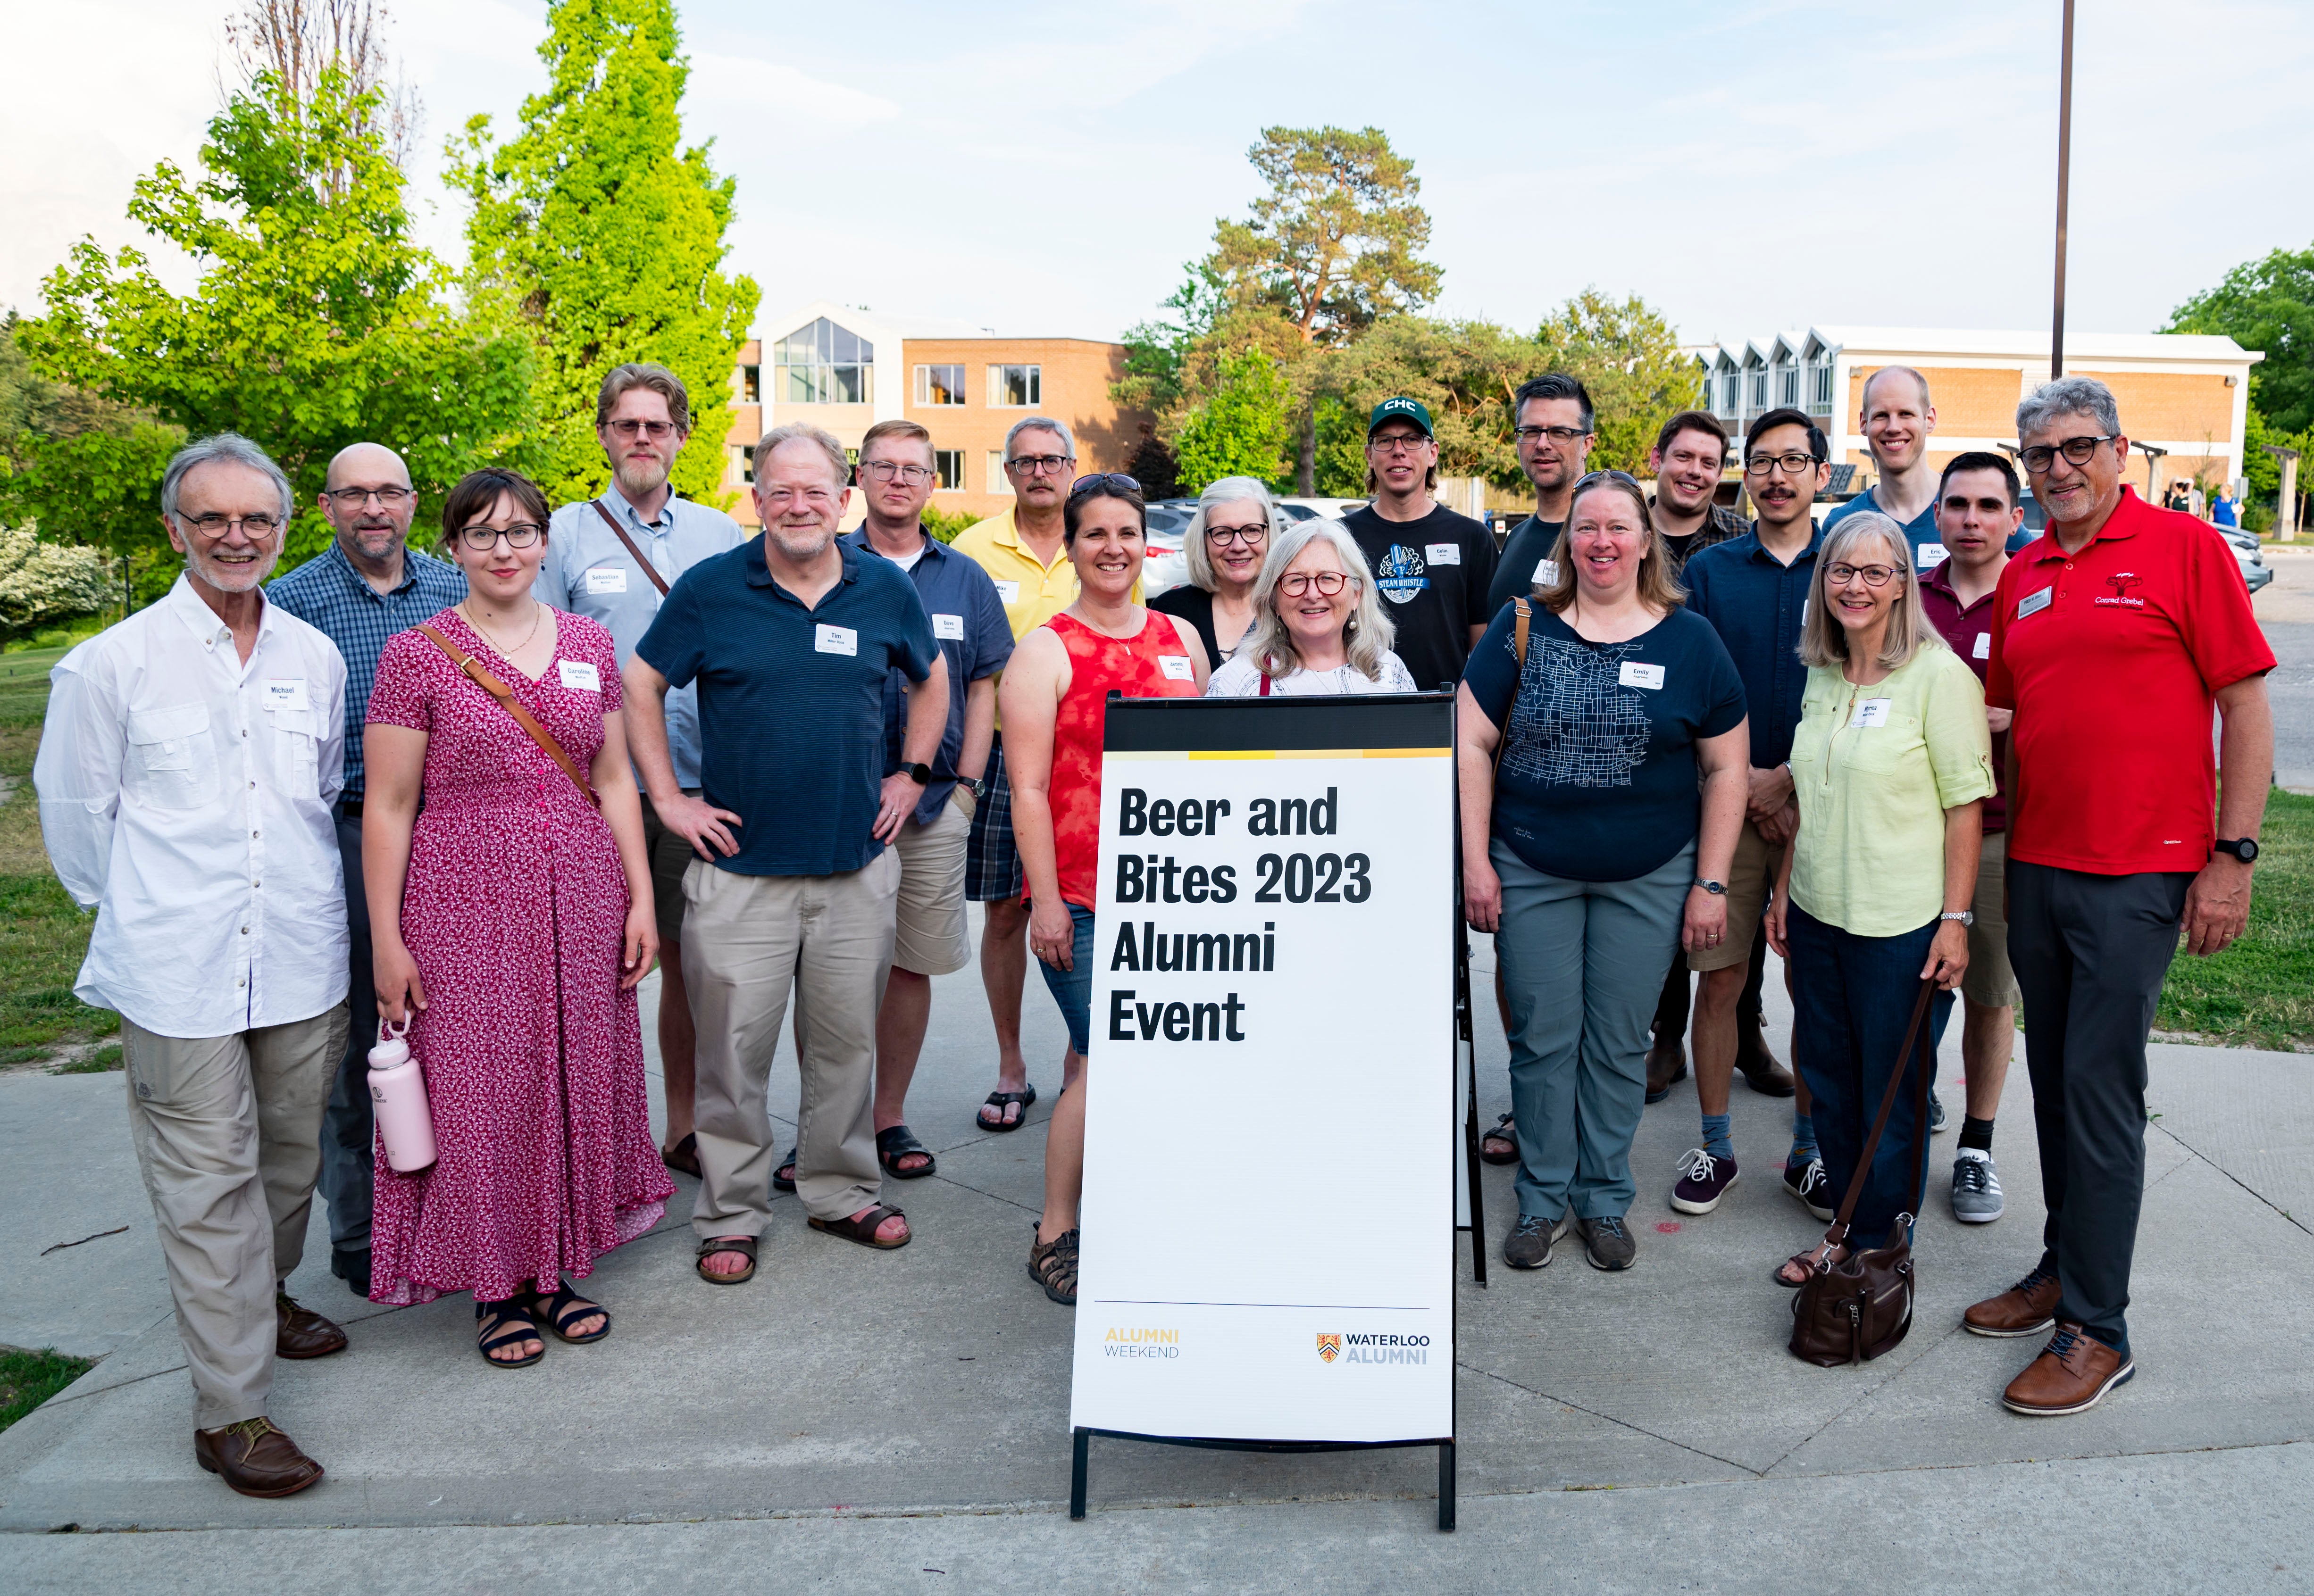 A group picture of twenty alumni outside the beers and bites alumni event sign on a bright sunny evening.